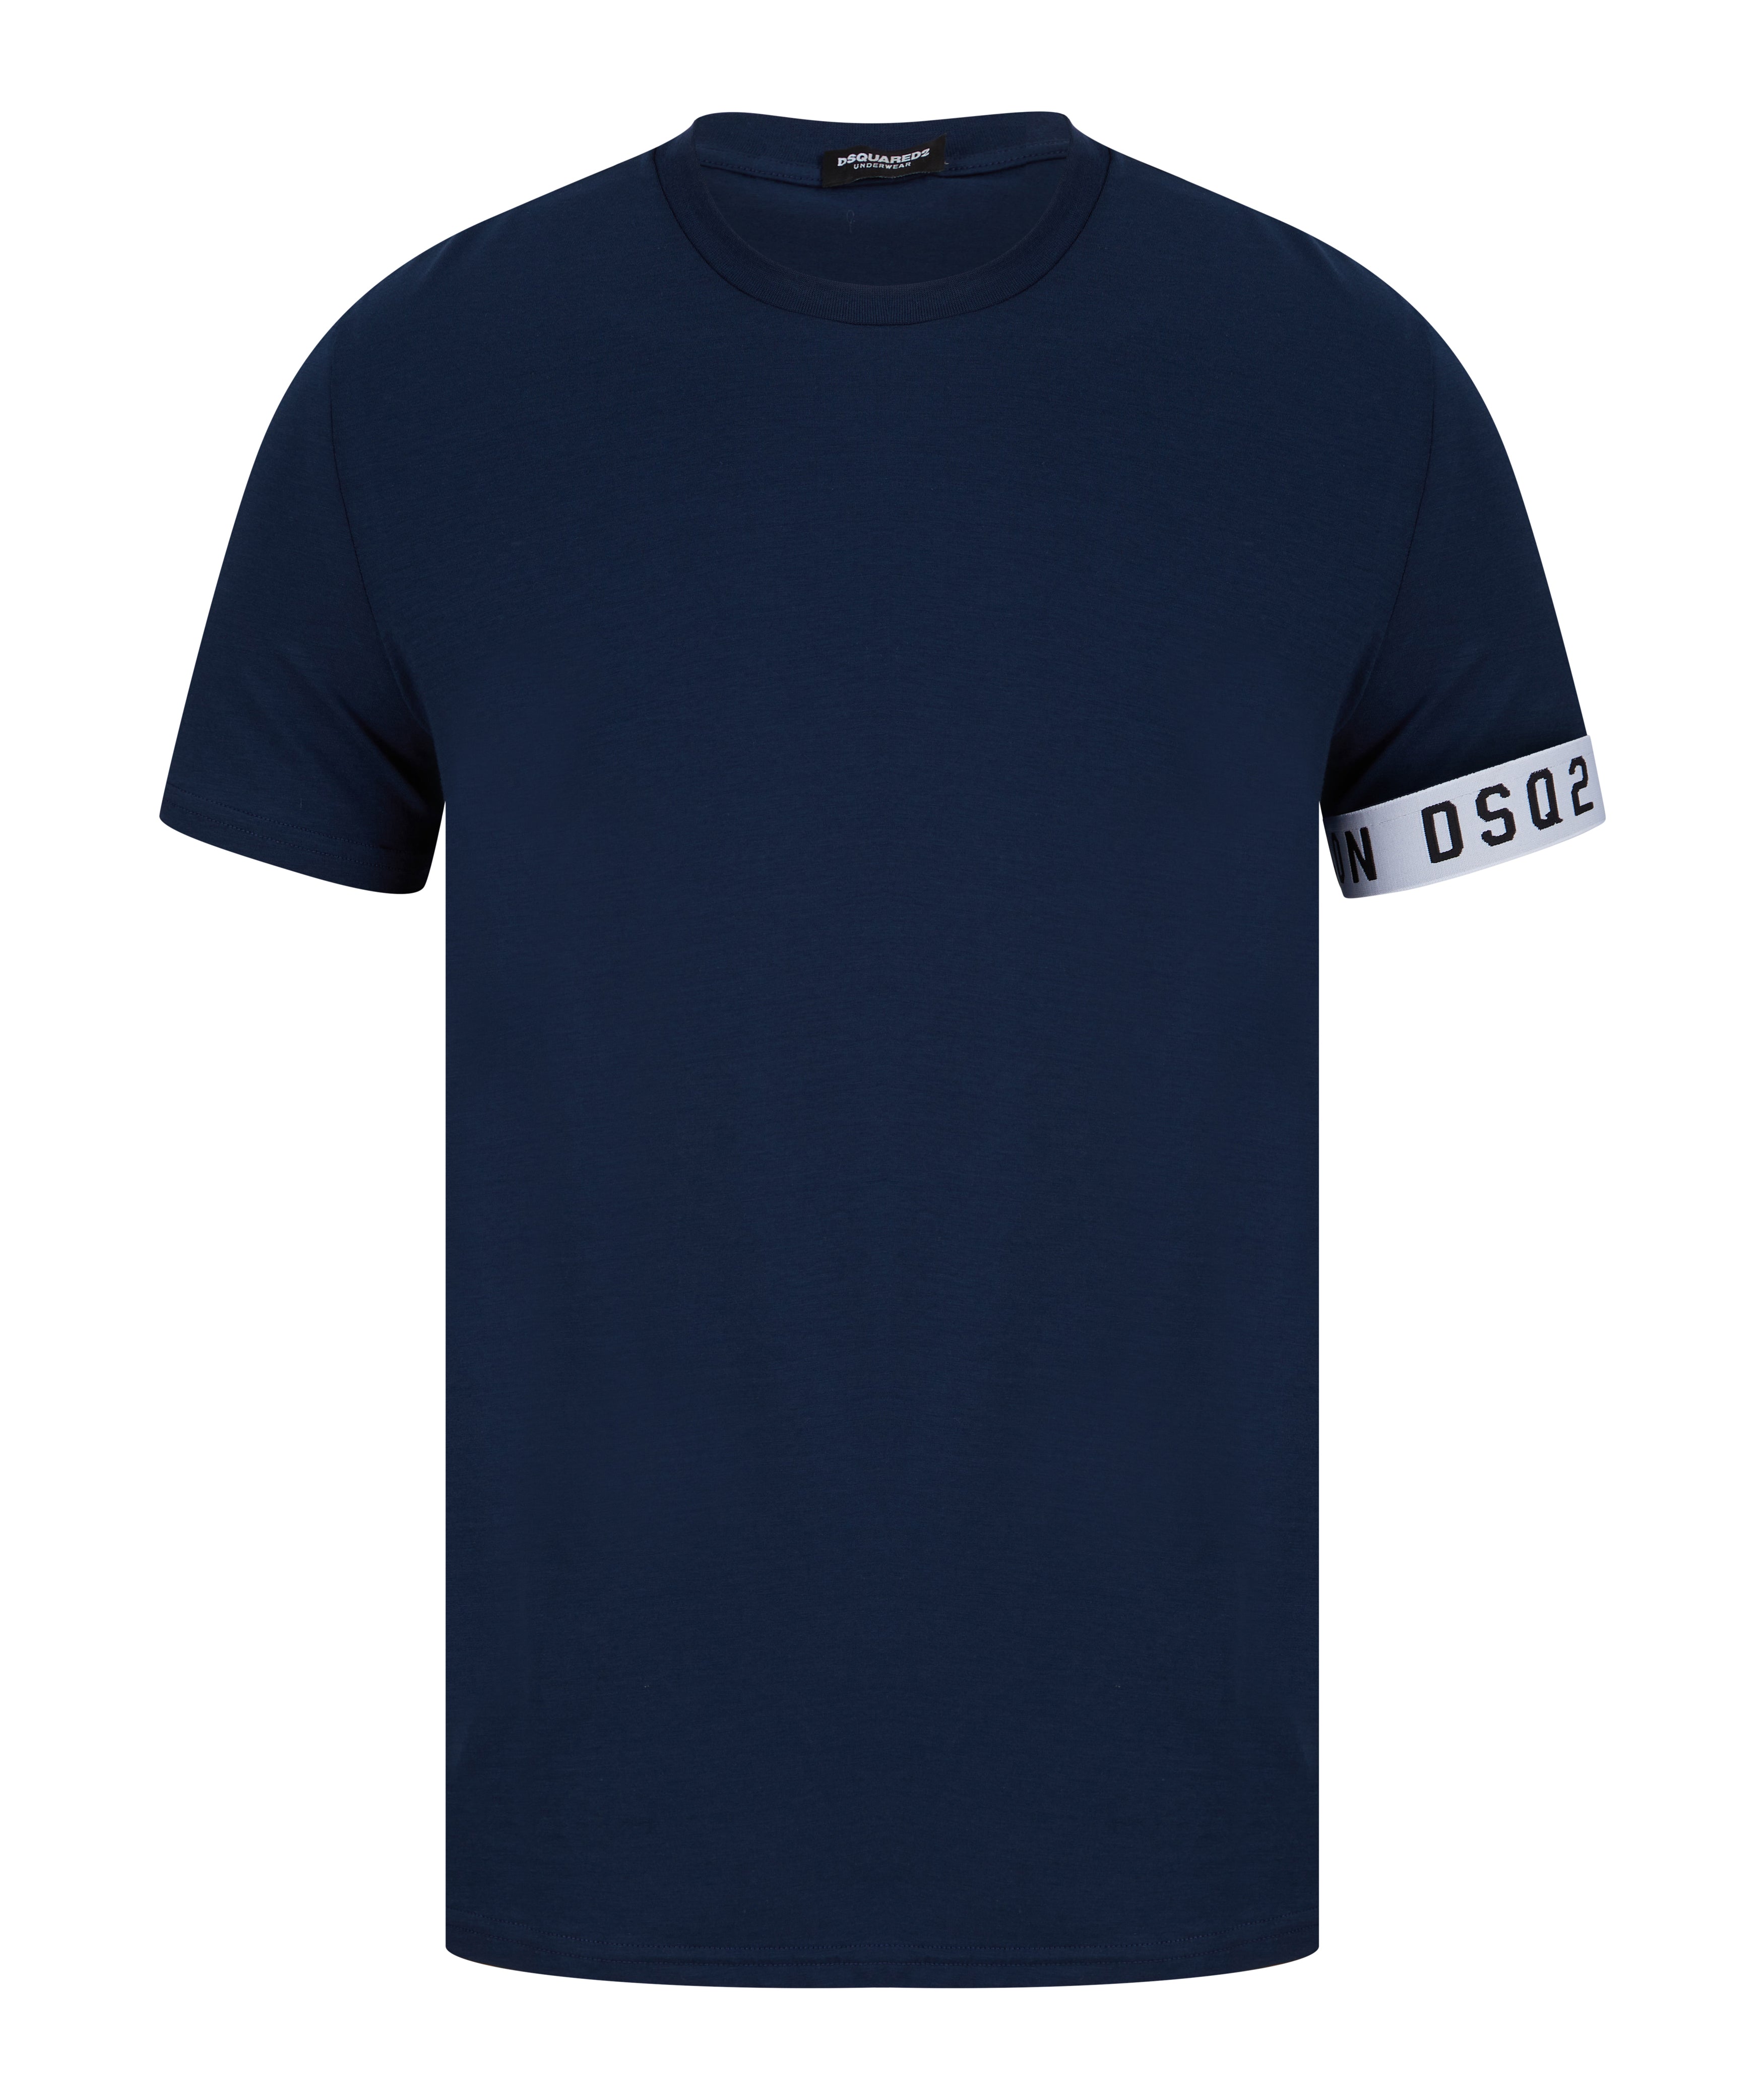 Load image into Gallery viewer, DSquared2 DSQ2 Arm Logo T Shirt Navy
